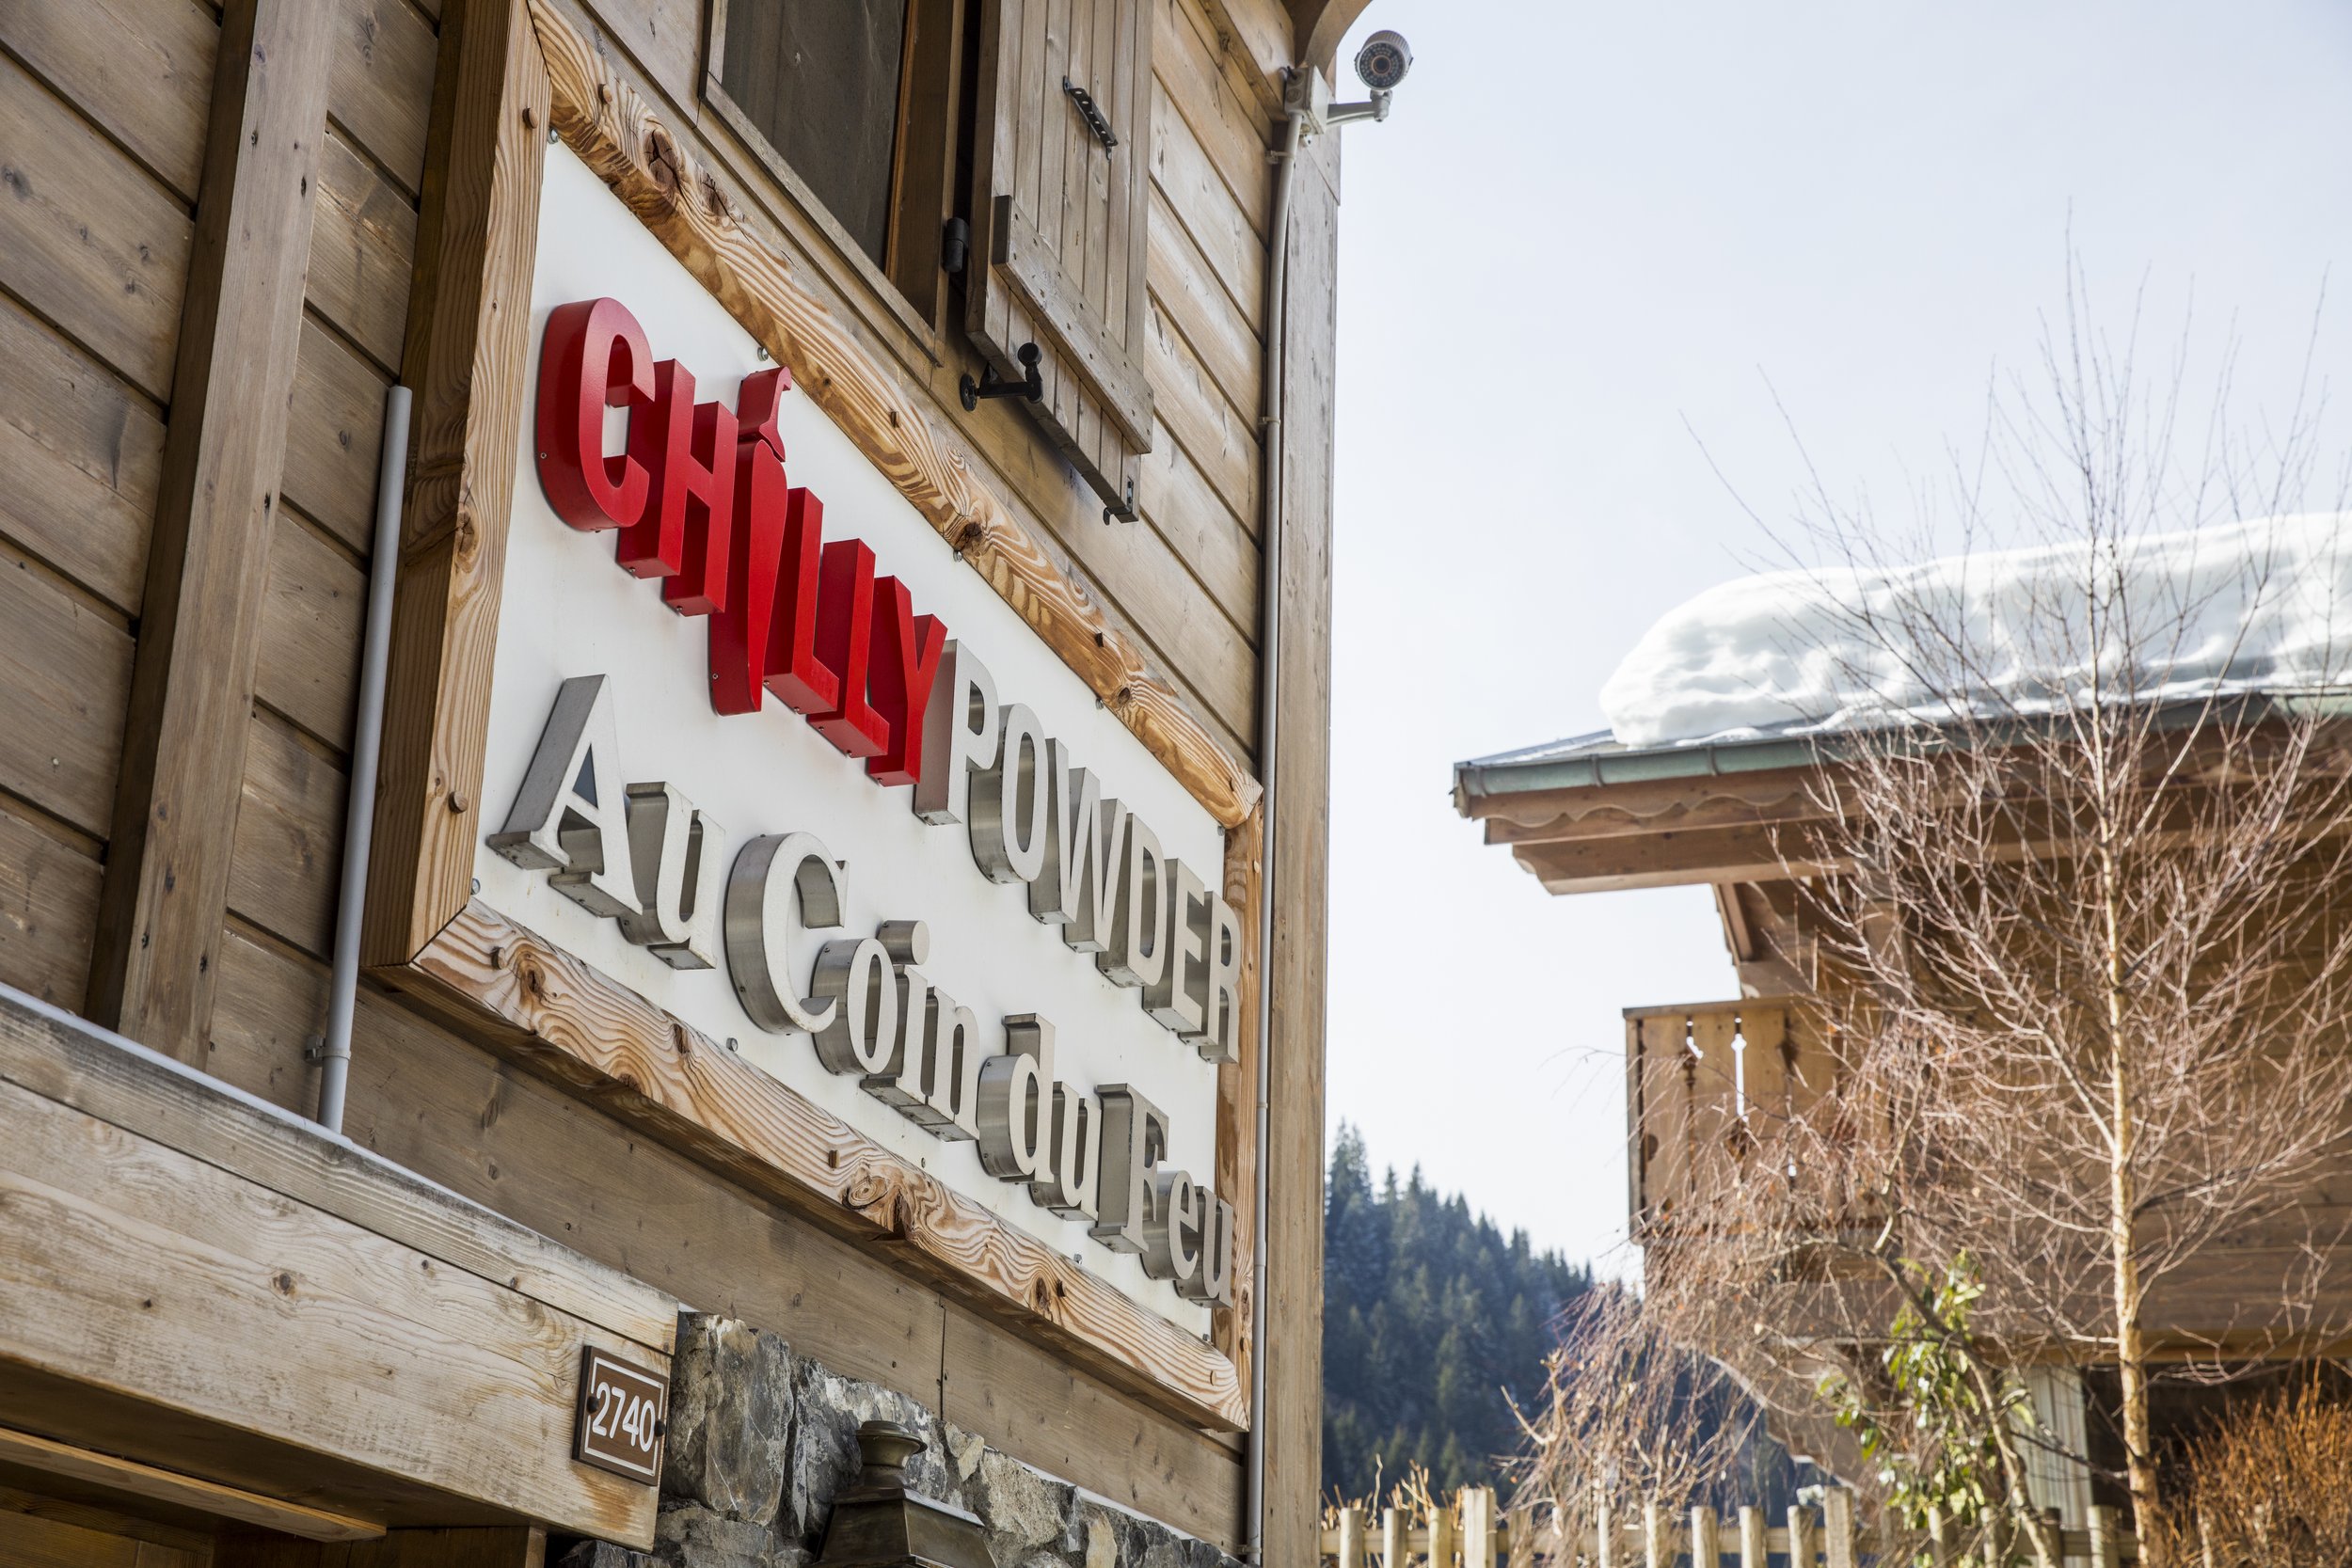 A sign on the wall of a wooden Alpine Hotel with the name 'Chilly Powder' in red and grey.